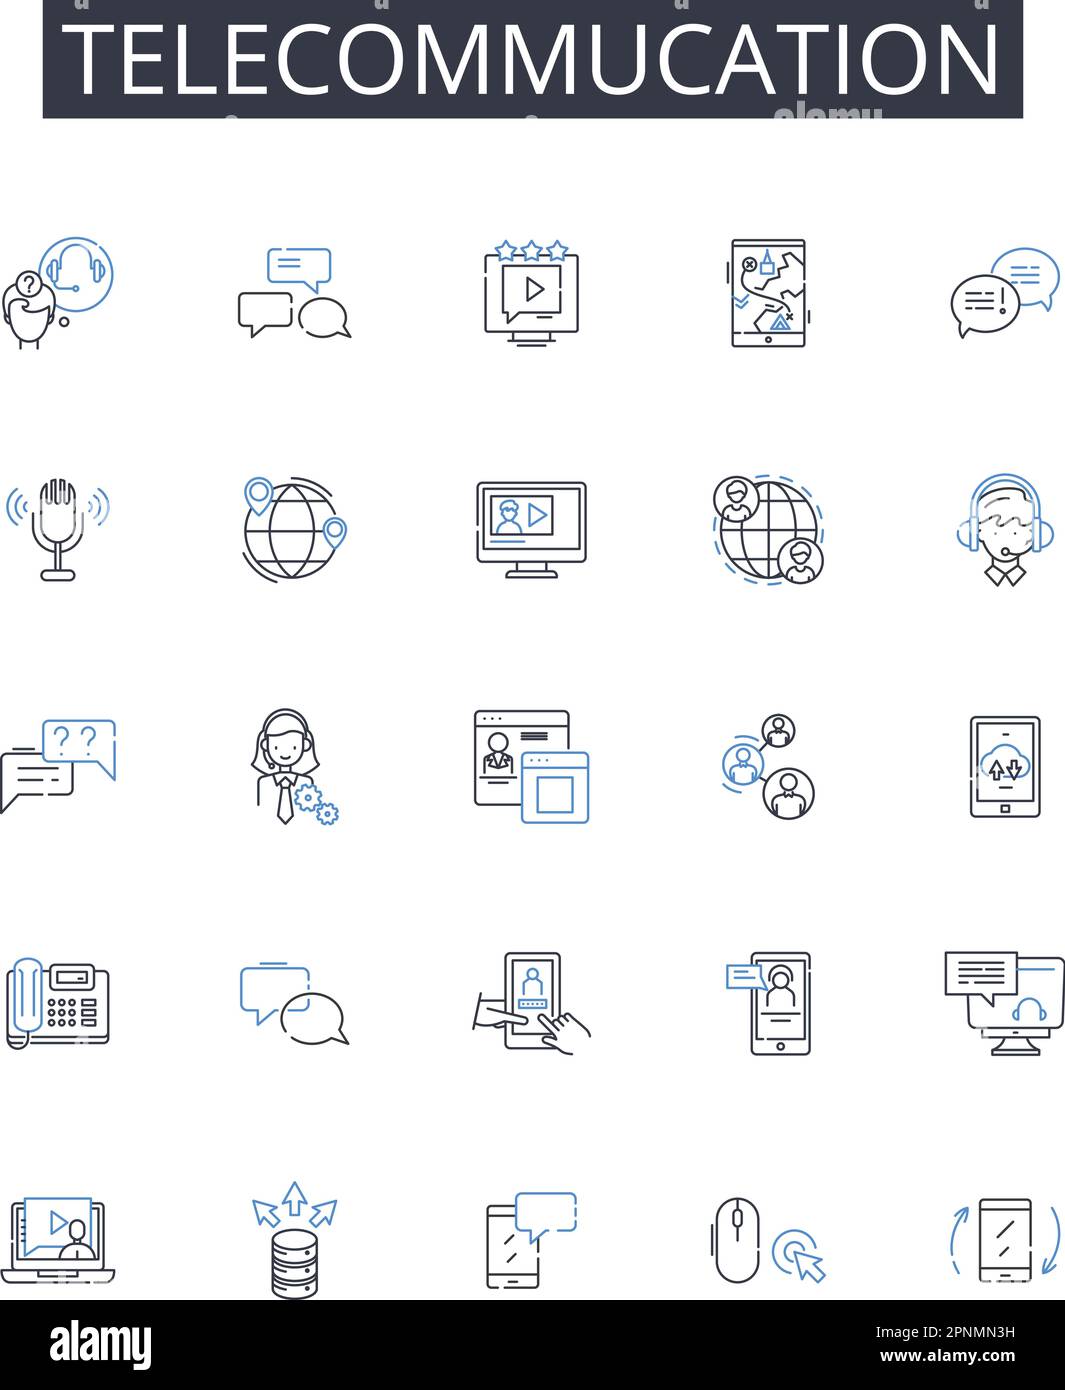 Telecommucation line icons collection. Campaigns, Subscribers, Automation, Click-throughs, Analytics, Segmentation, Personalization vector and linear Stock Vector